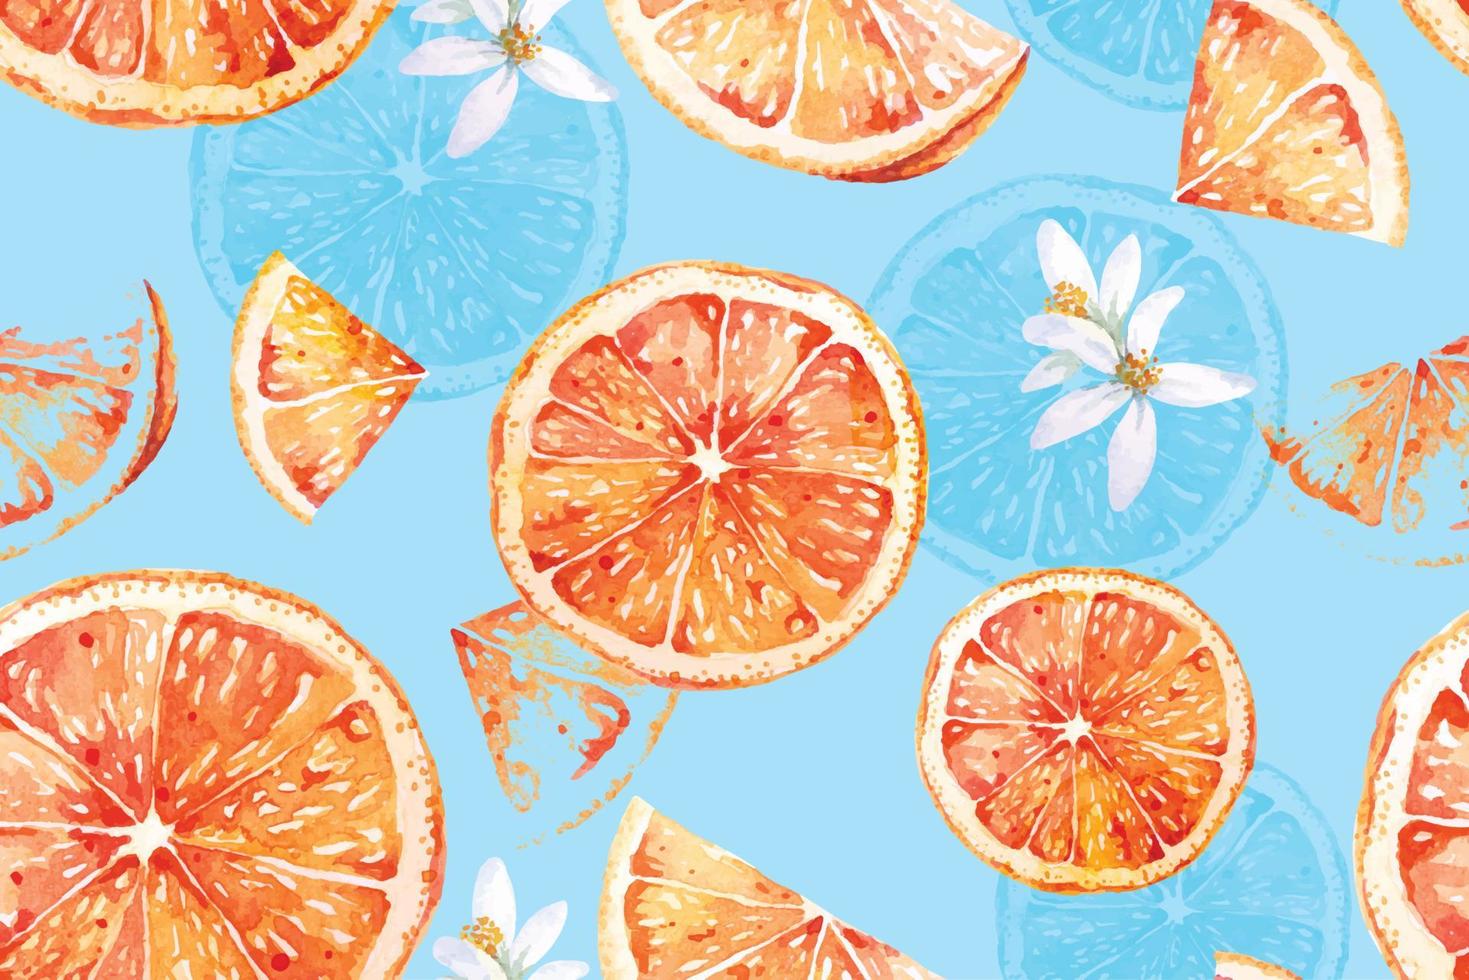 Seamless pattern of tangerines with watercolor for fabric luxurious and wallpaper, vintage style.And flowers, stalks and leaves.Slice of orange.Citrus fruit. vector